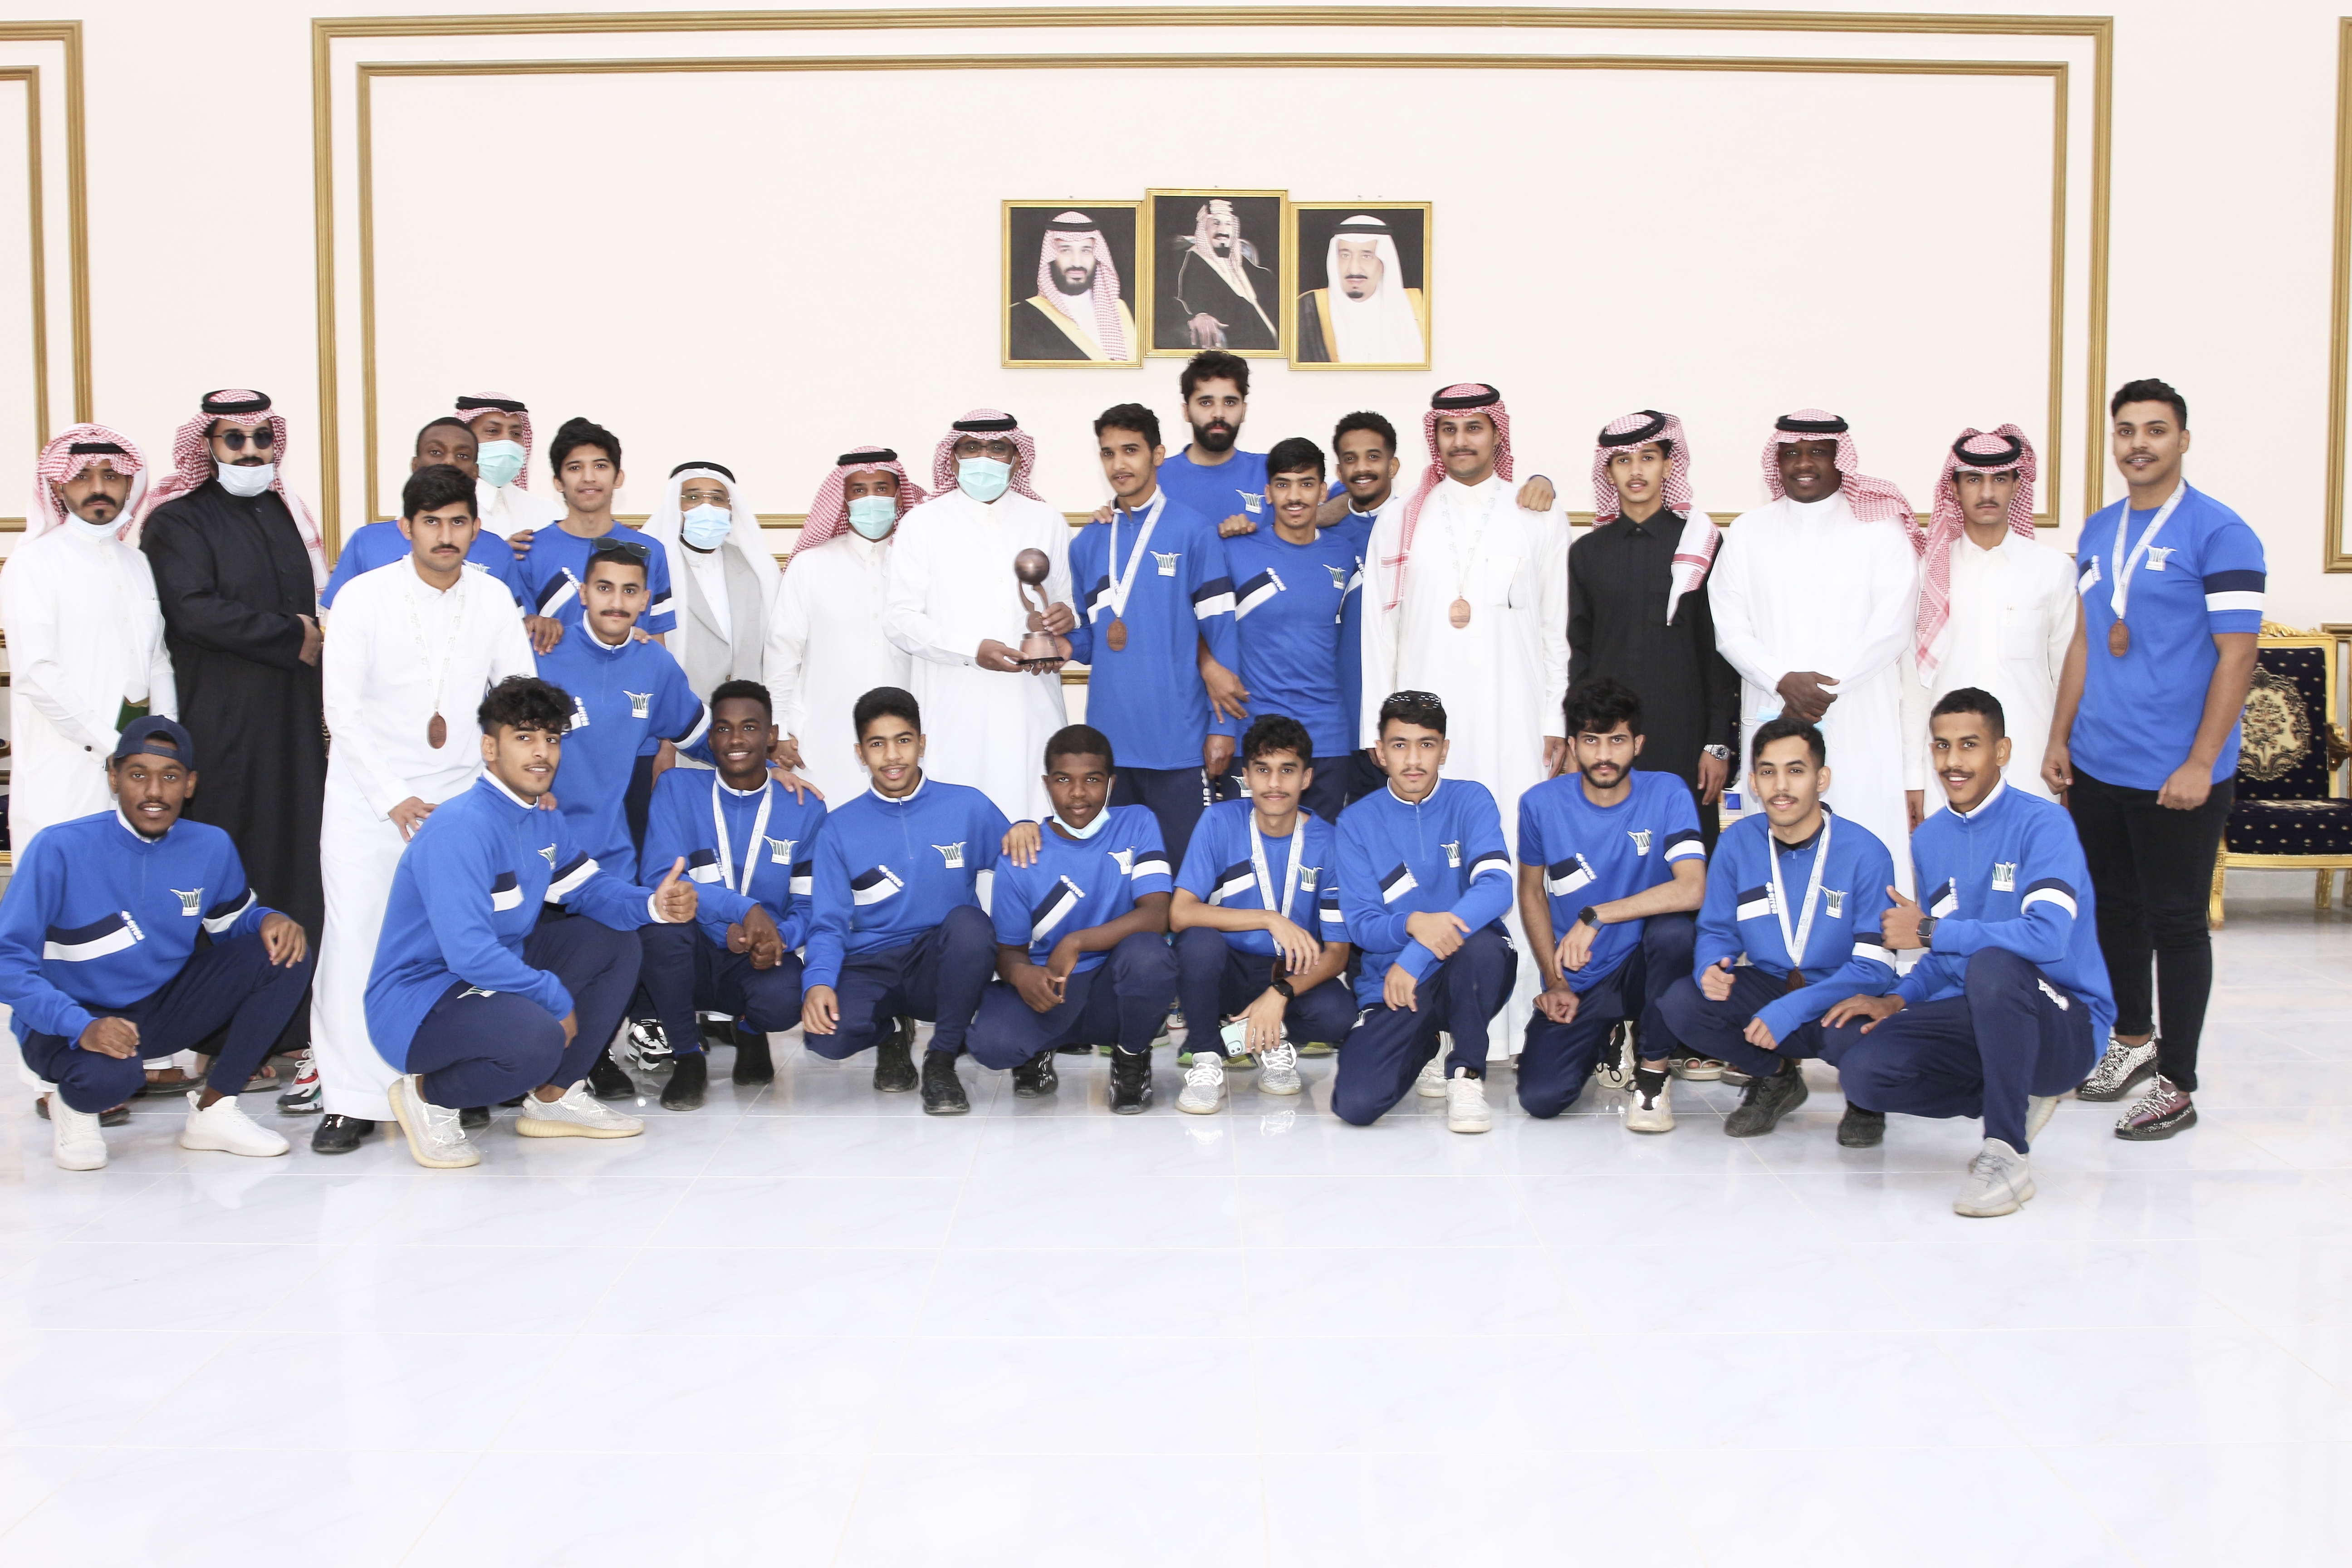  The President of Bisha University welcomes the football team on the occasion of winning the third rank in the Universities Championship